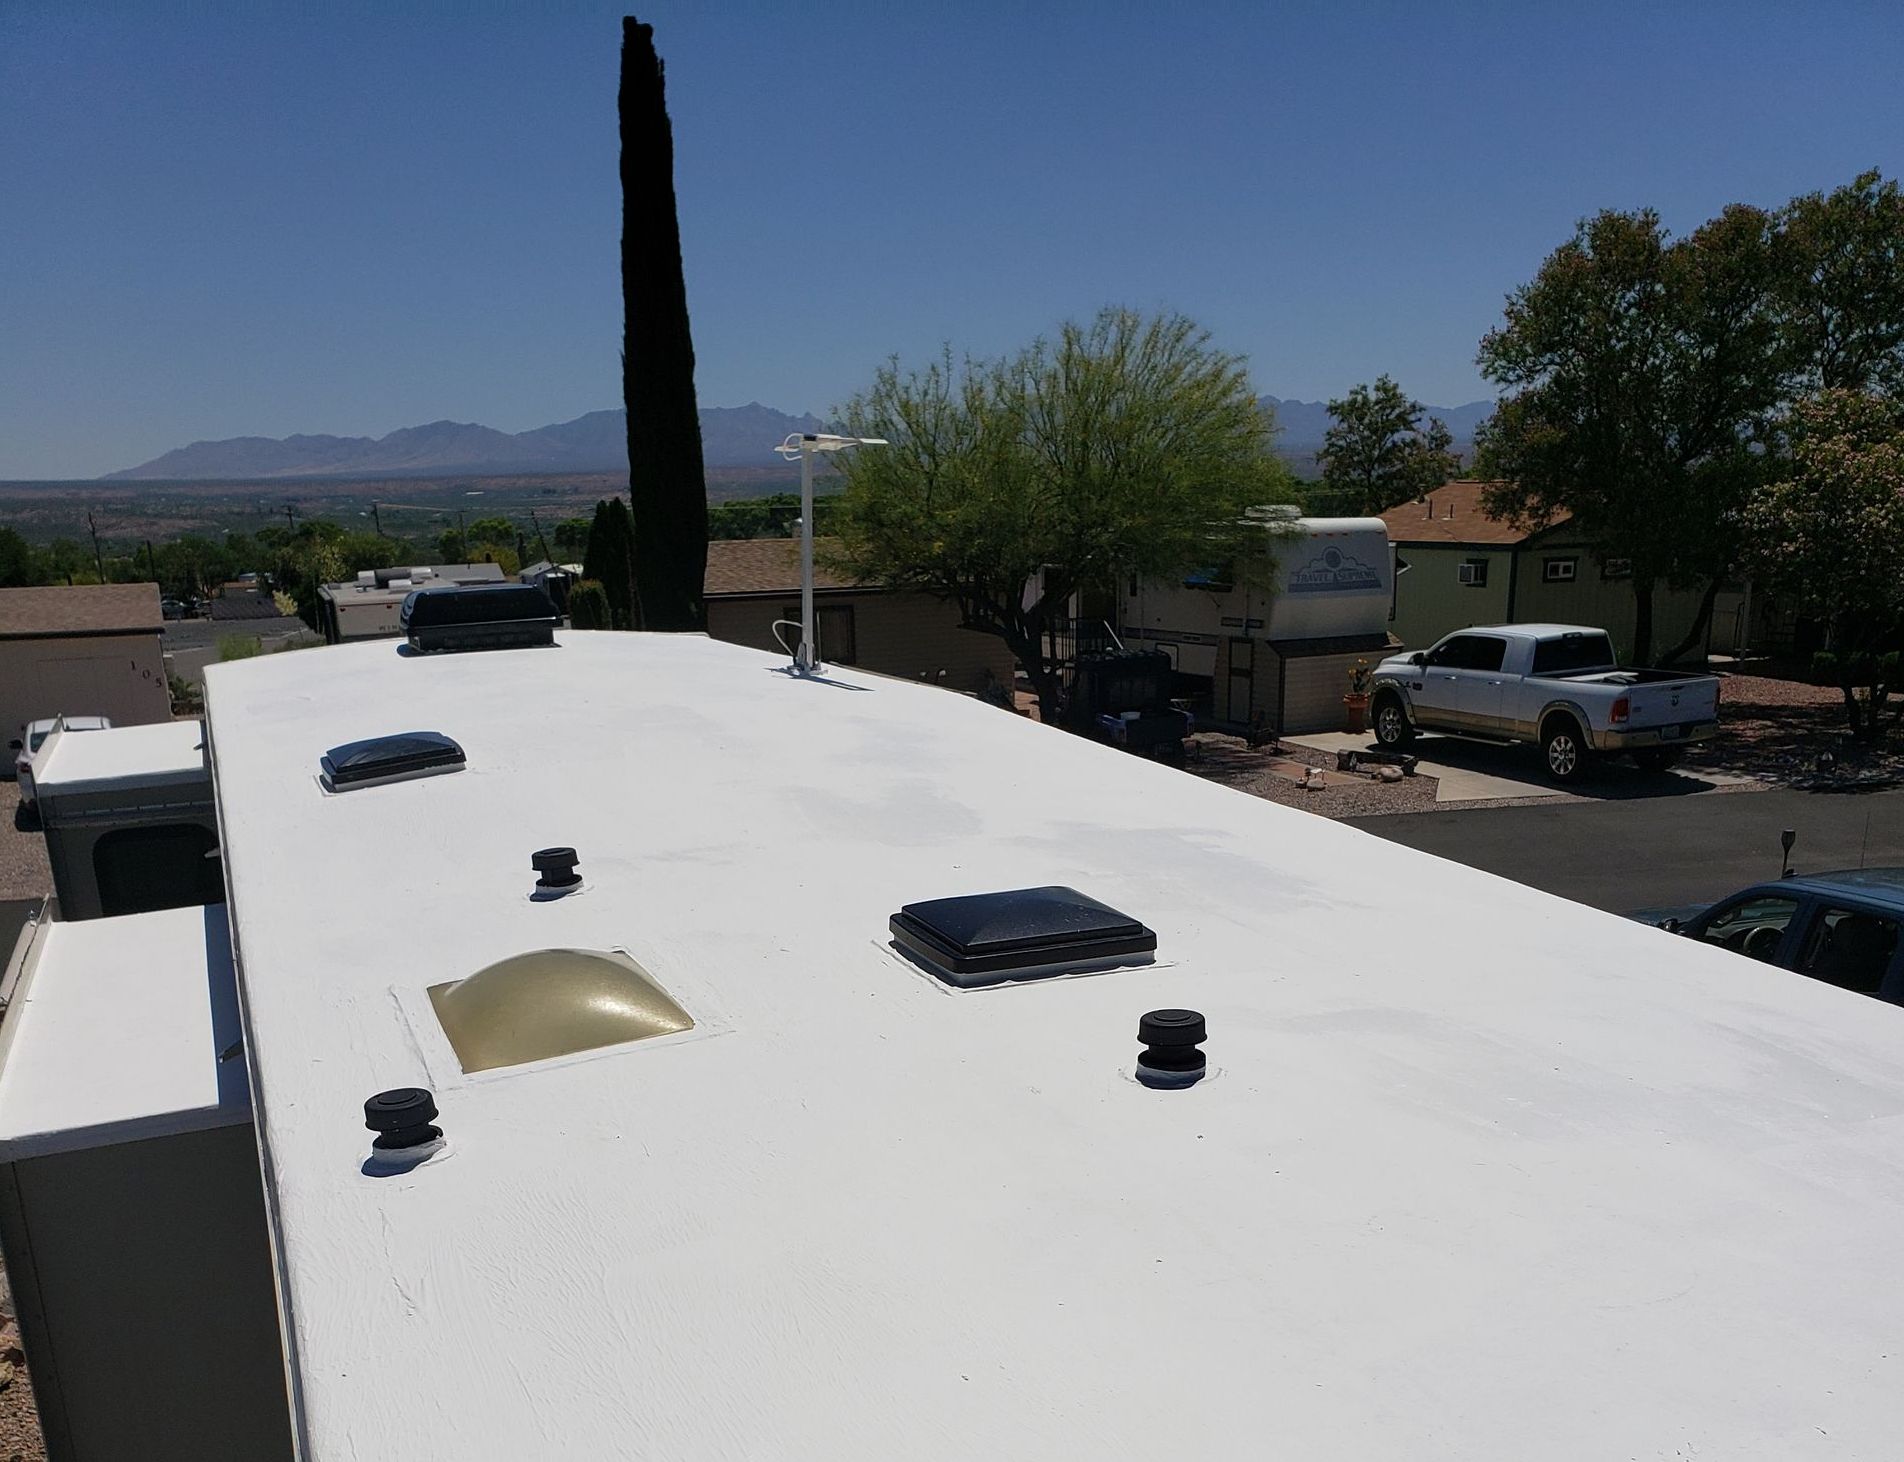 RV Roofing Solutions complete RV roof system stretches and remains flexible up to 300%. The system expands and contracts with your RV. This is important since your RV is constantly moving. 
Included in every RV Roofing Solutions RV roof system is a considerable amount of flexibility and solar UV reflection values, which help offer  additional protection. 
This adds years of protection to your RV.
When cured, the RV roof system forms a permeable membrane, which prevents liquid infiltration, but allows moisture vapor to vent. 
The product we use releases 91% of the sun's heat and makes your RV more energy efficient. 
We specialize in all aspects of RV Roofing Solutions system,s as well as minor and major RV roof repairs.
We are dedicated to providing you with exceptional quality RV roofing products, customer service, and a 100%, 10-year maintenance-FREE, no-leak, labor and material guarantee.